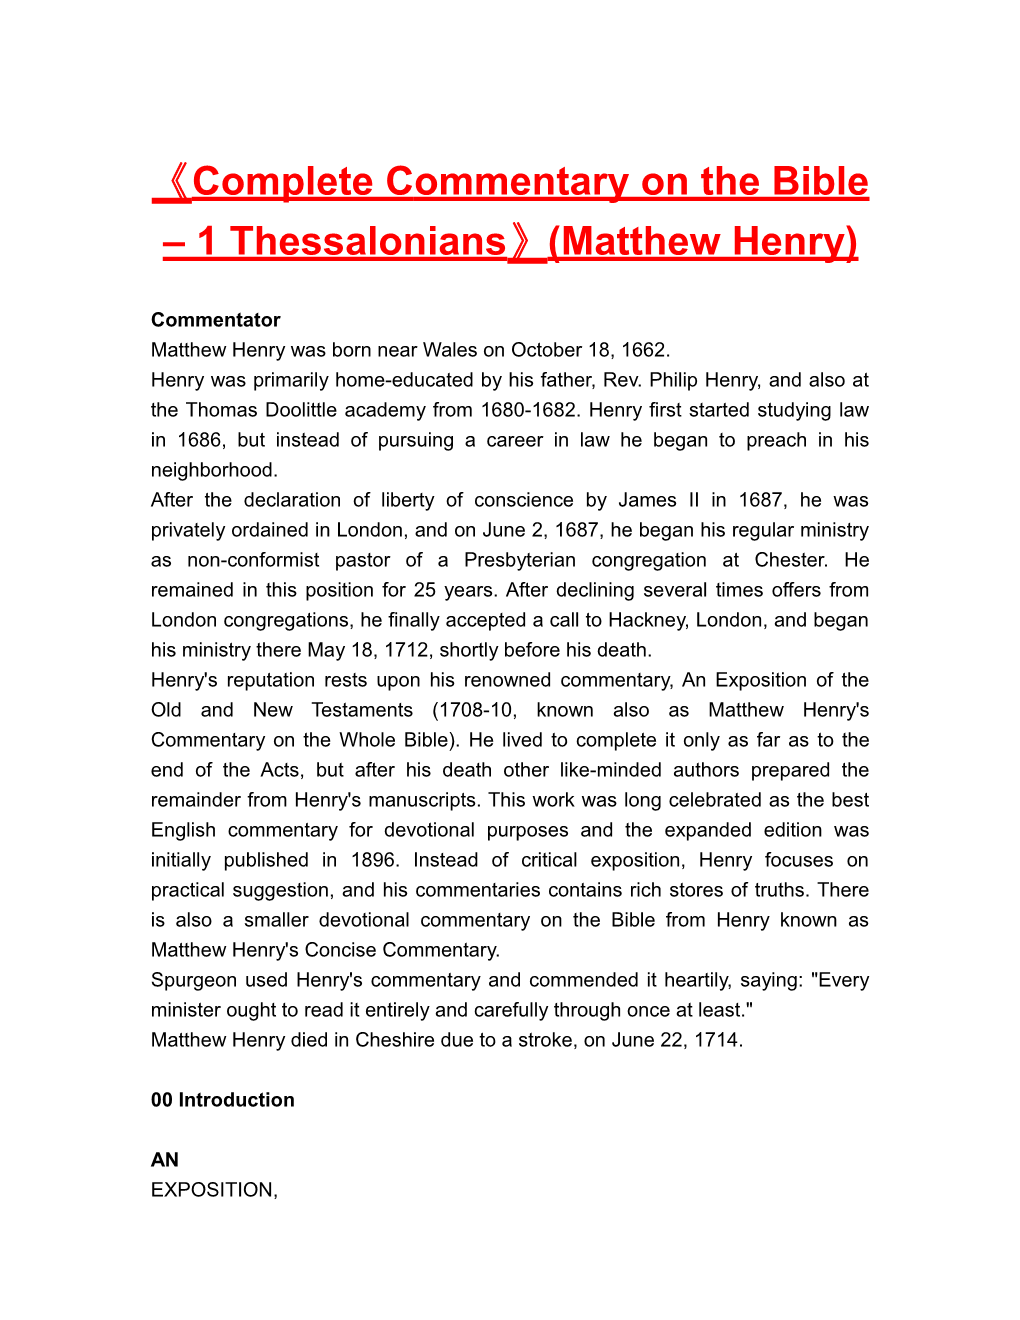 Completecommentary on the Bible 1 Thessalonians (Matthew Henry)